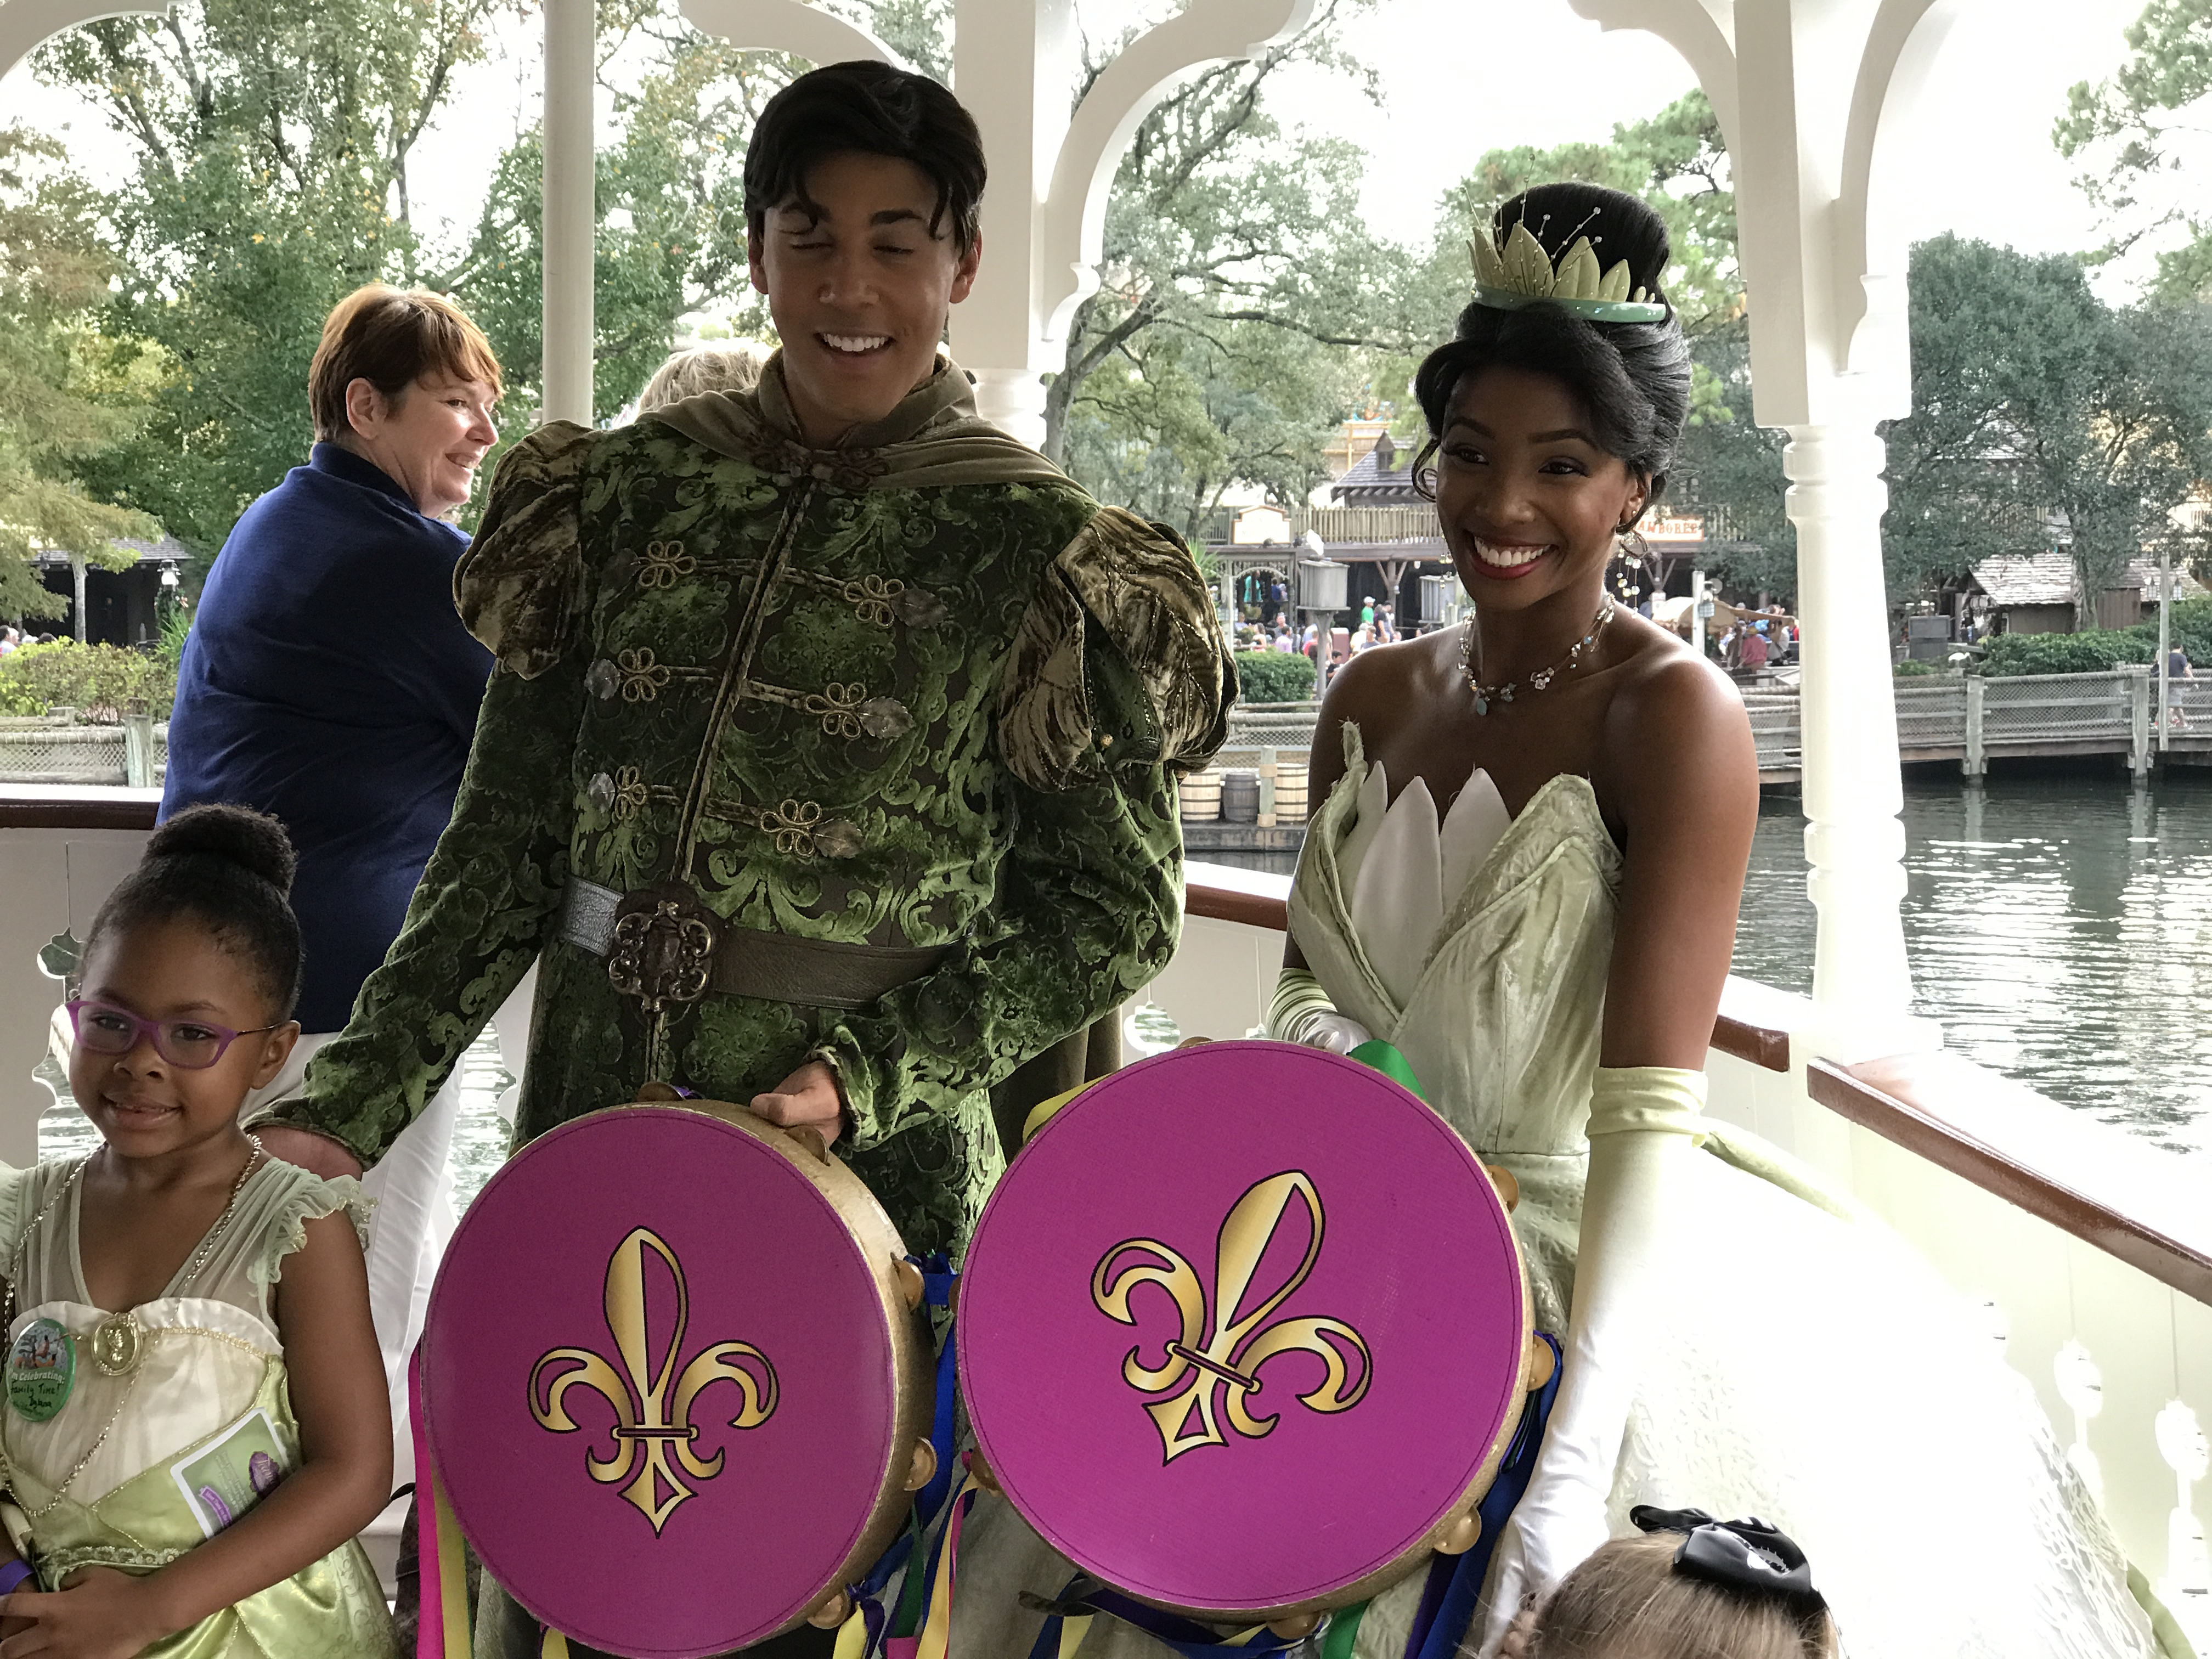 Event Review: Tiana's Riverboat Party & Ice Cream Social